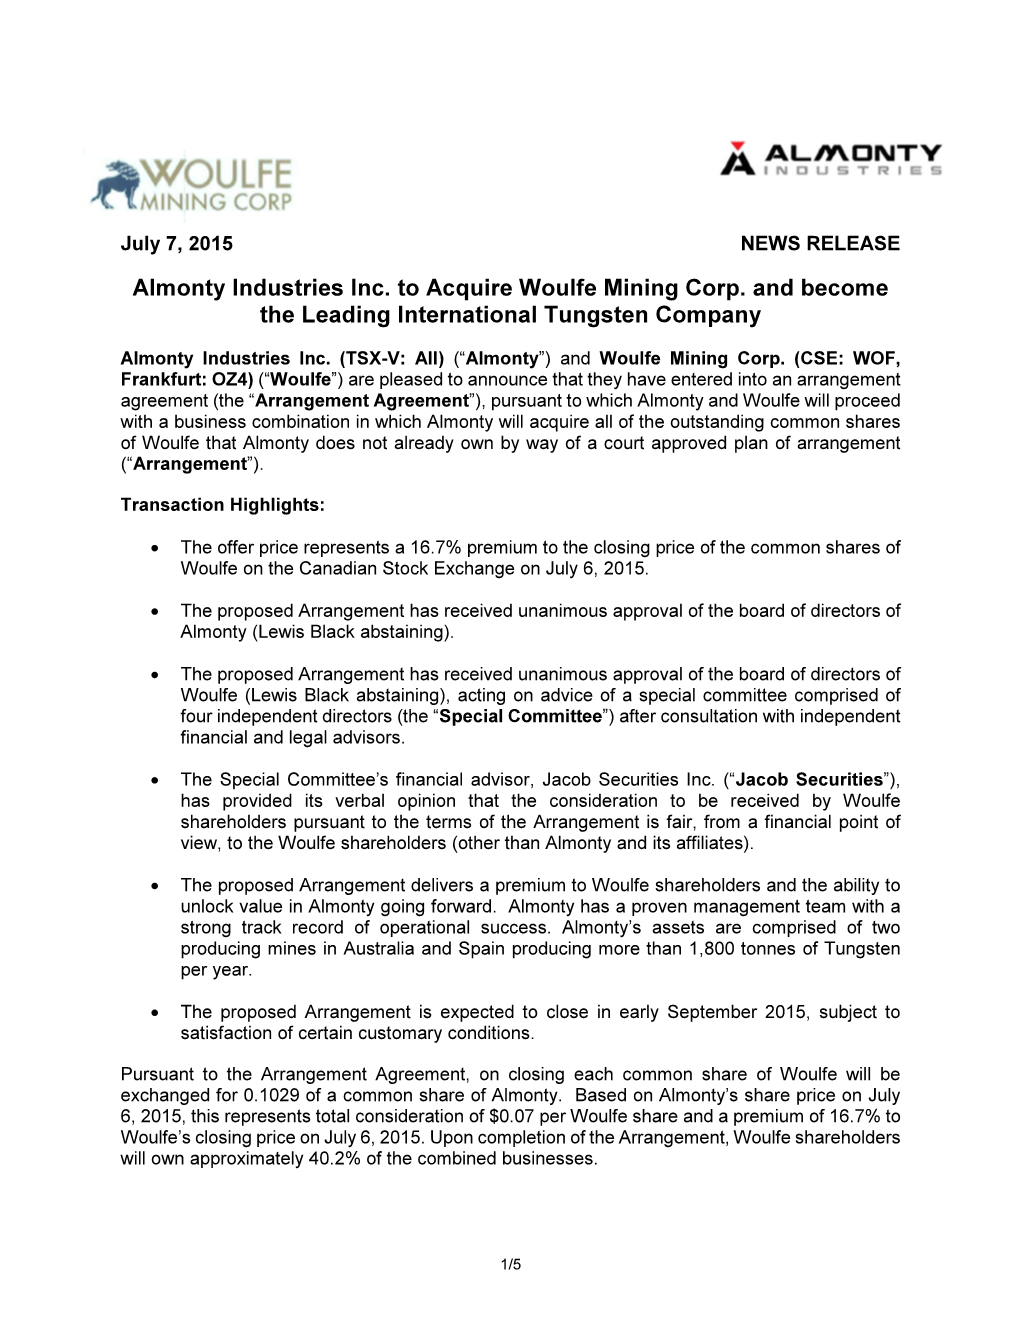 Almonty Industries Inc. to Acquire Woulfe Mining Corp. and Become the Leading International Tungsten Company